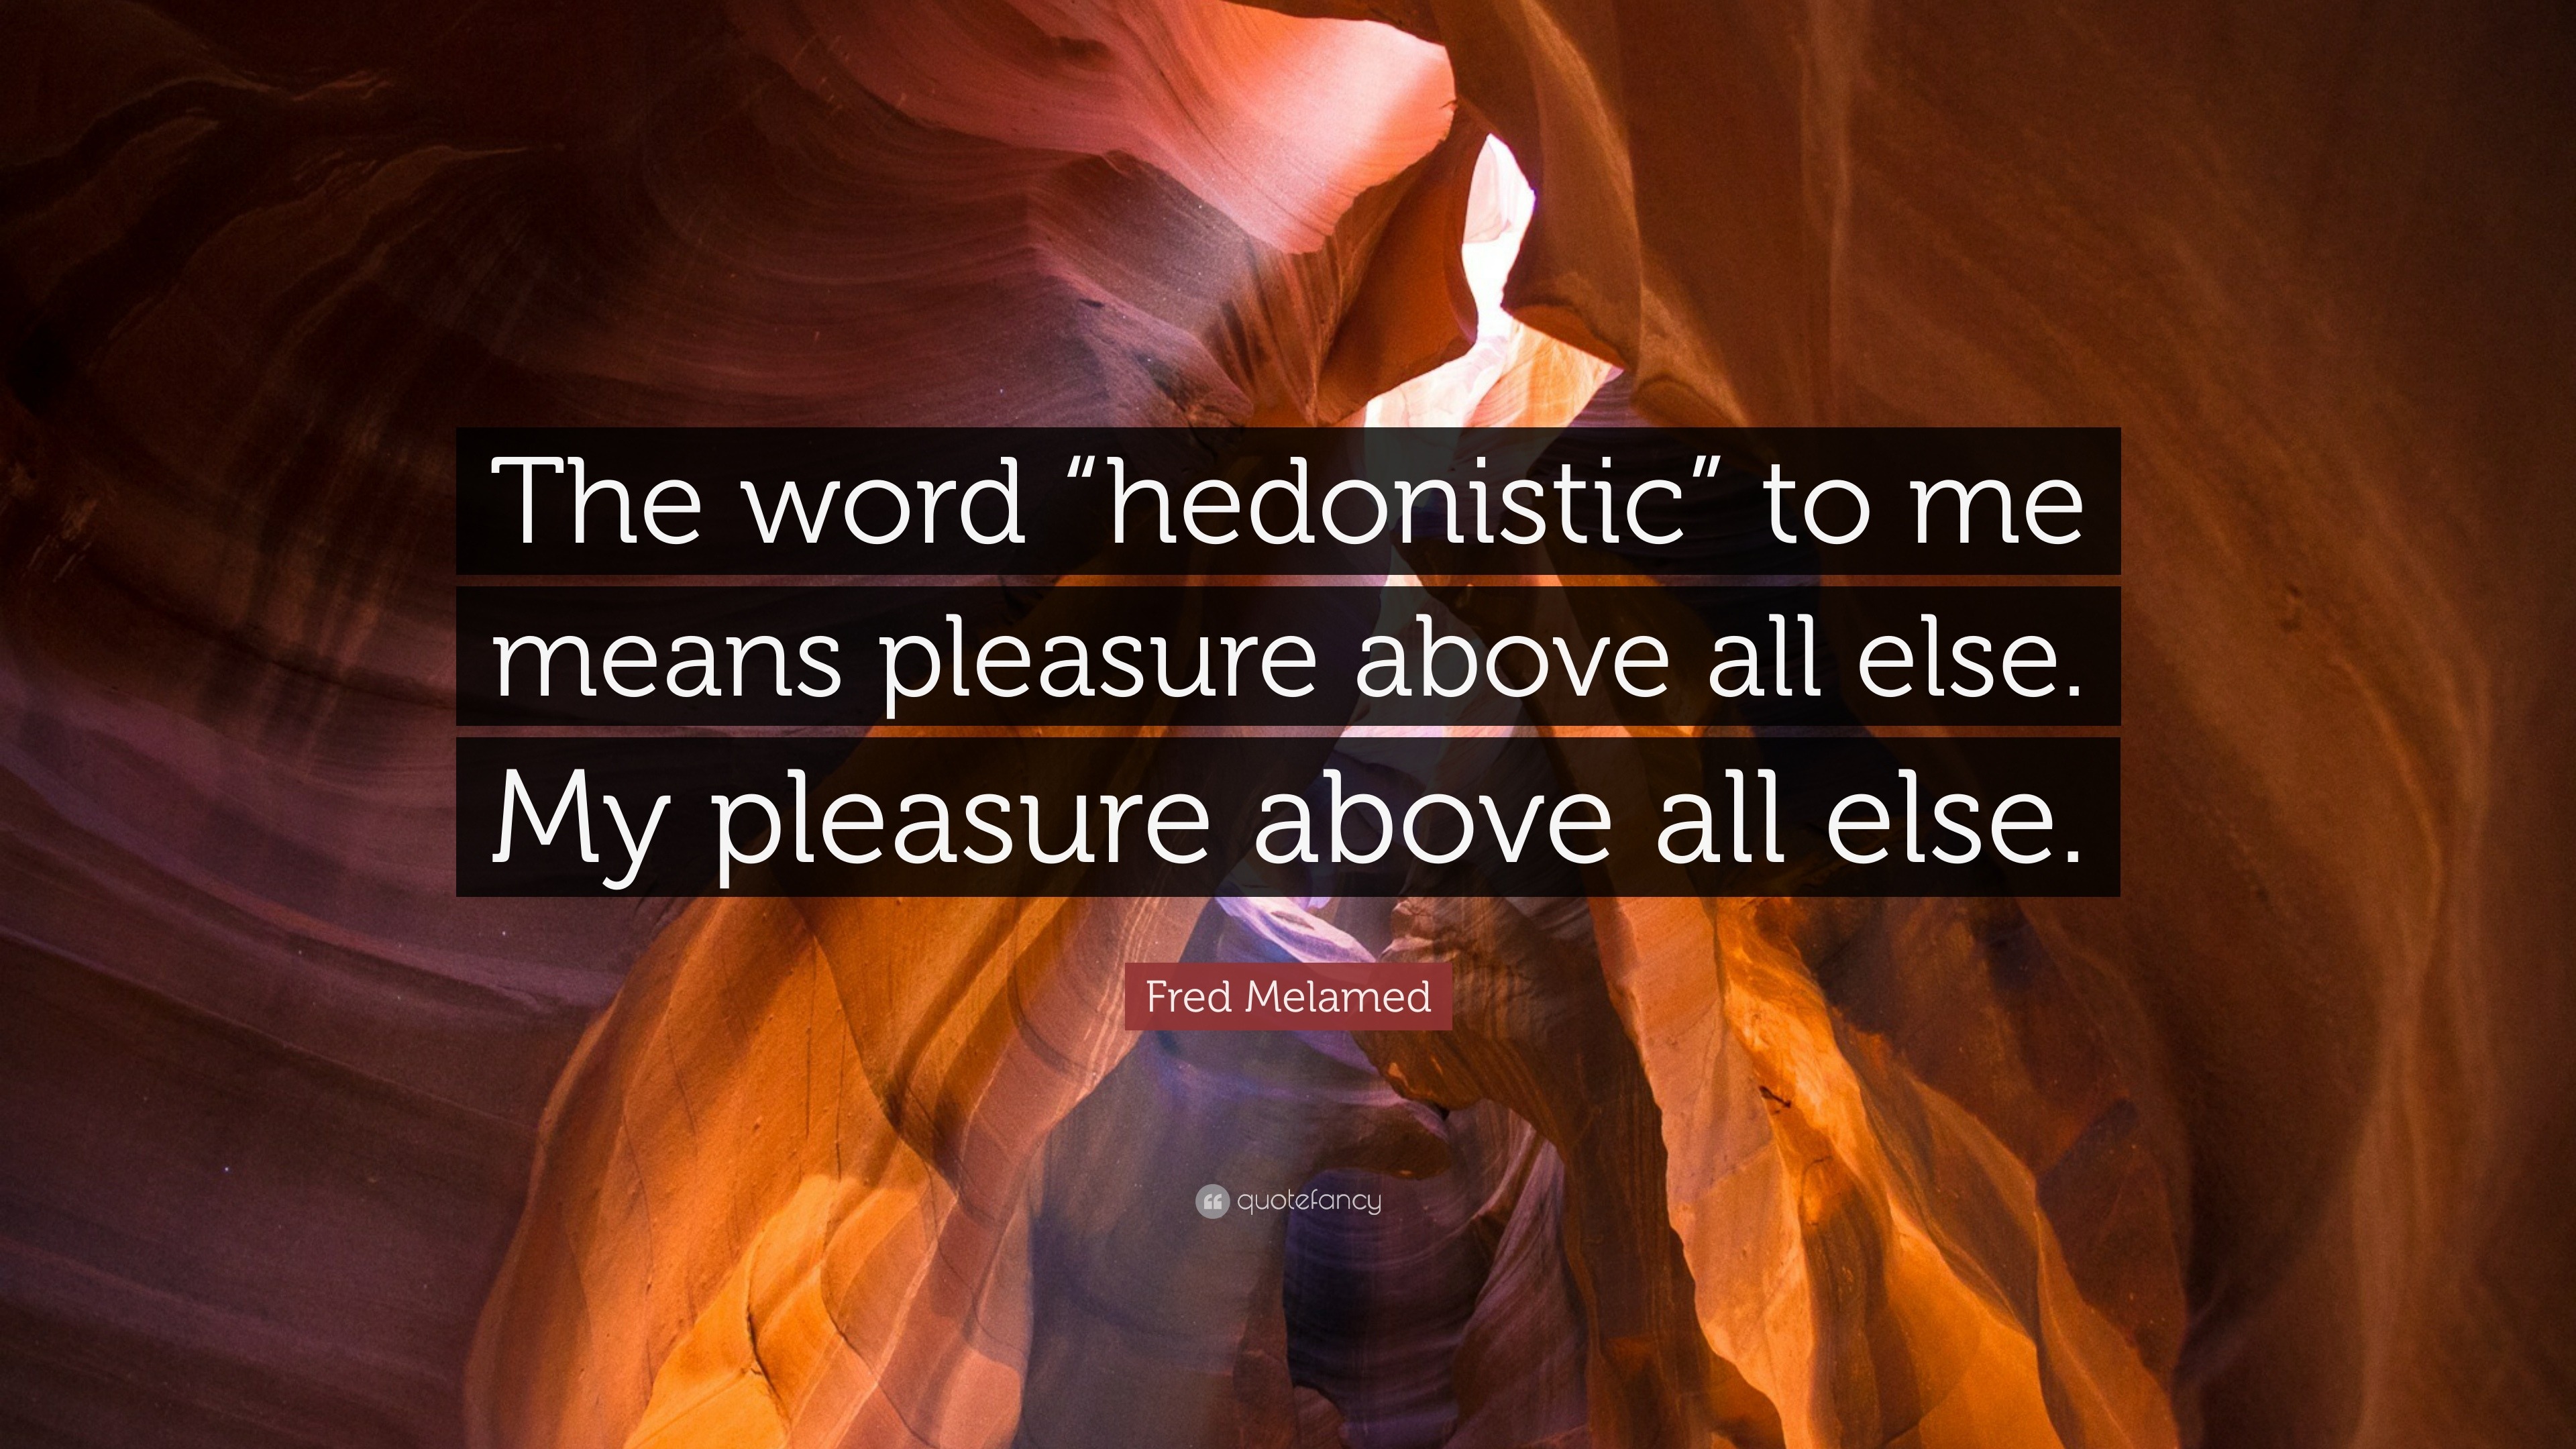 hedonism meaning